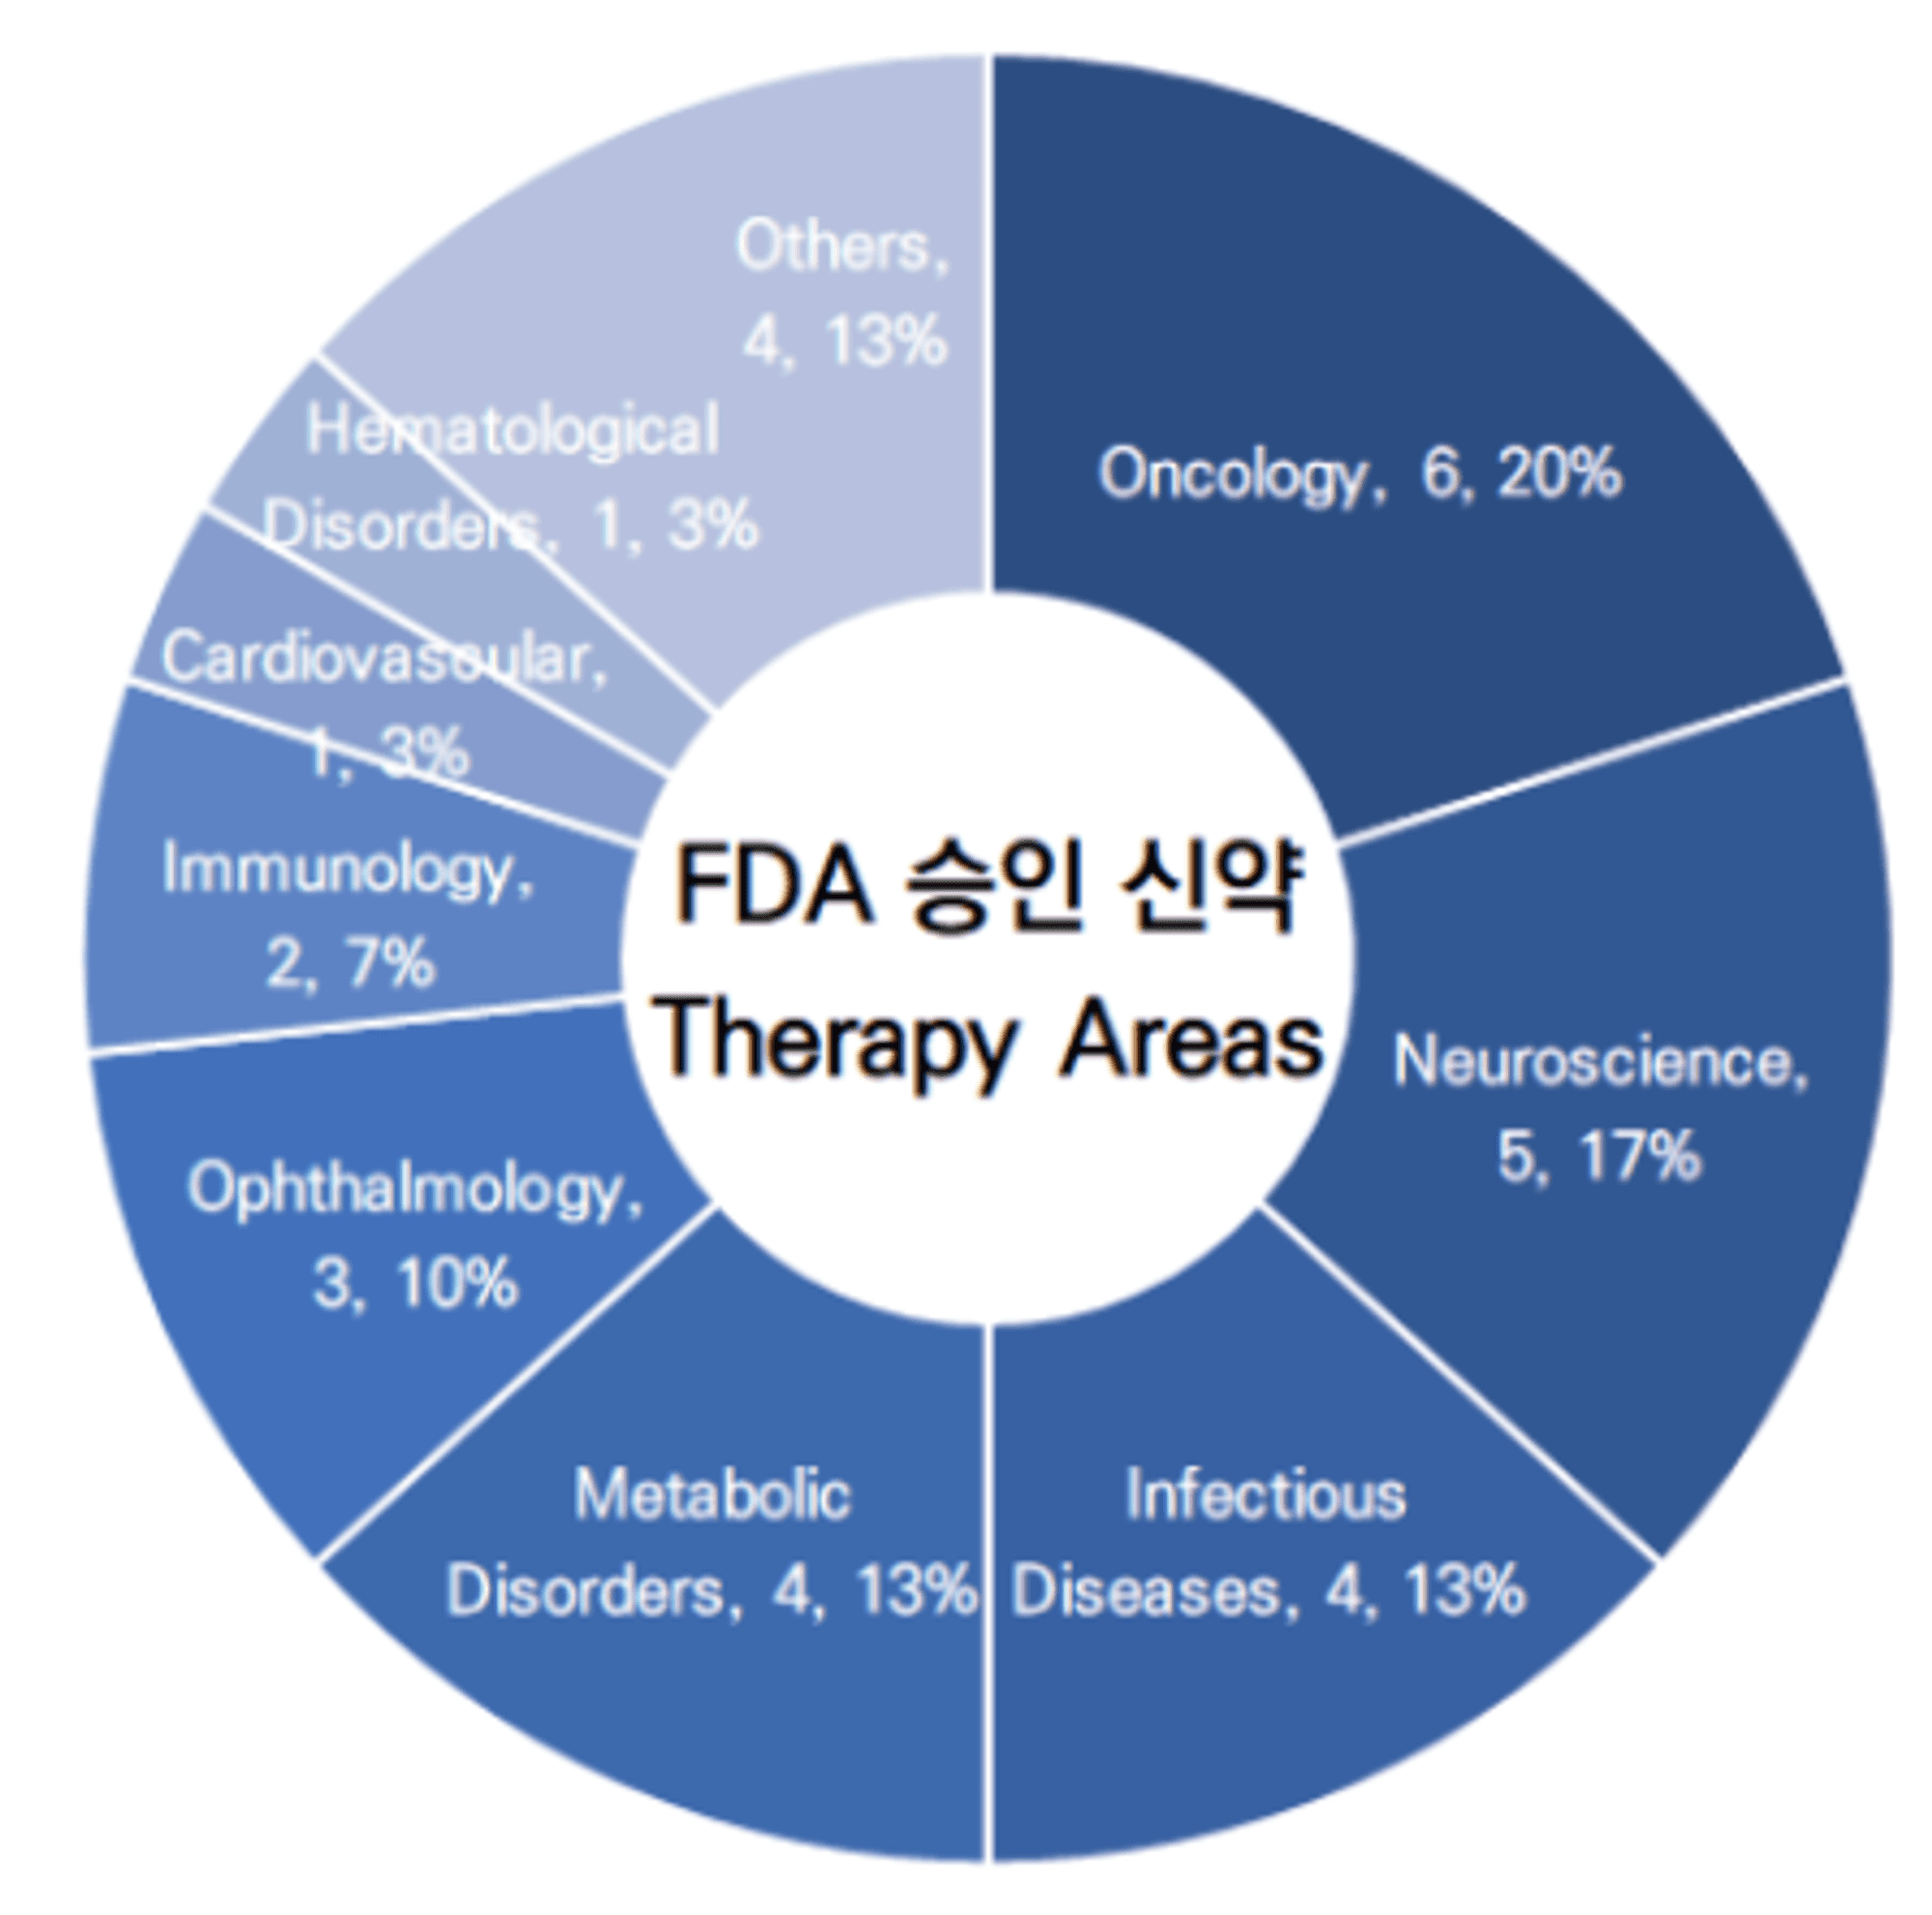 fda-approved-therapy-areas